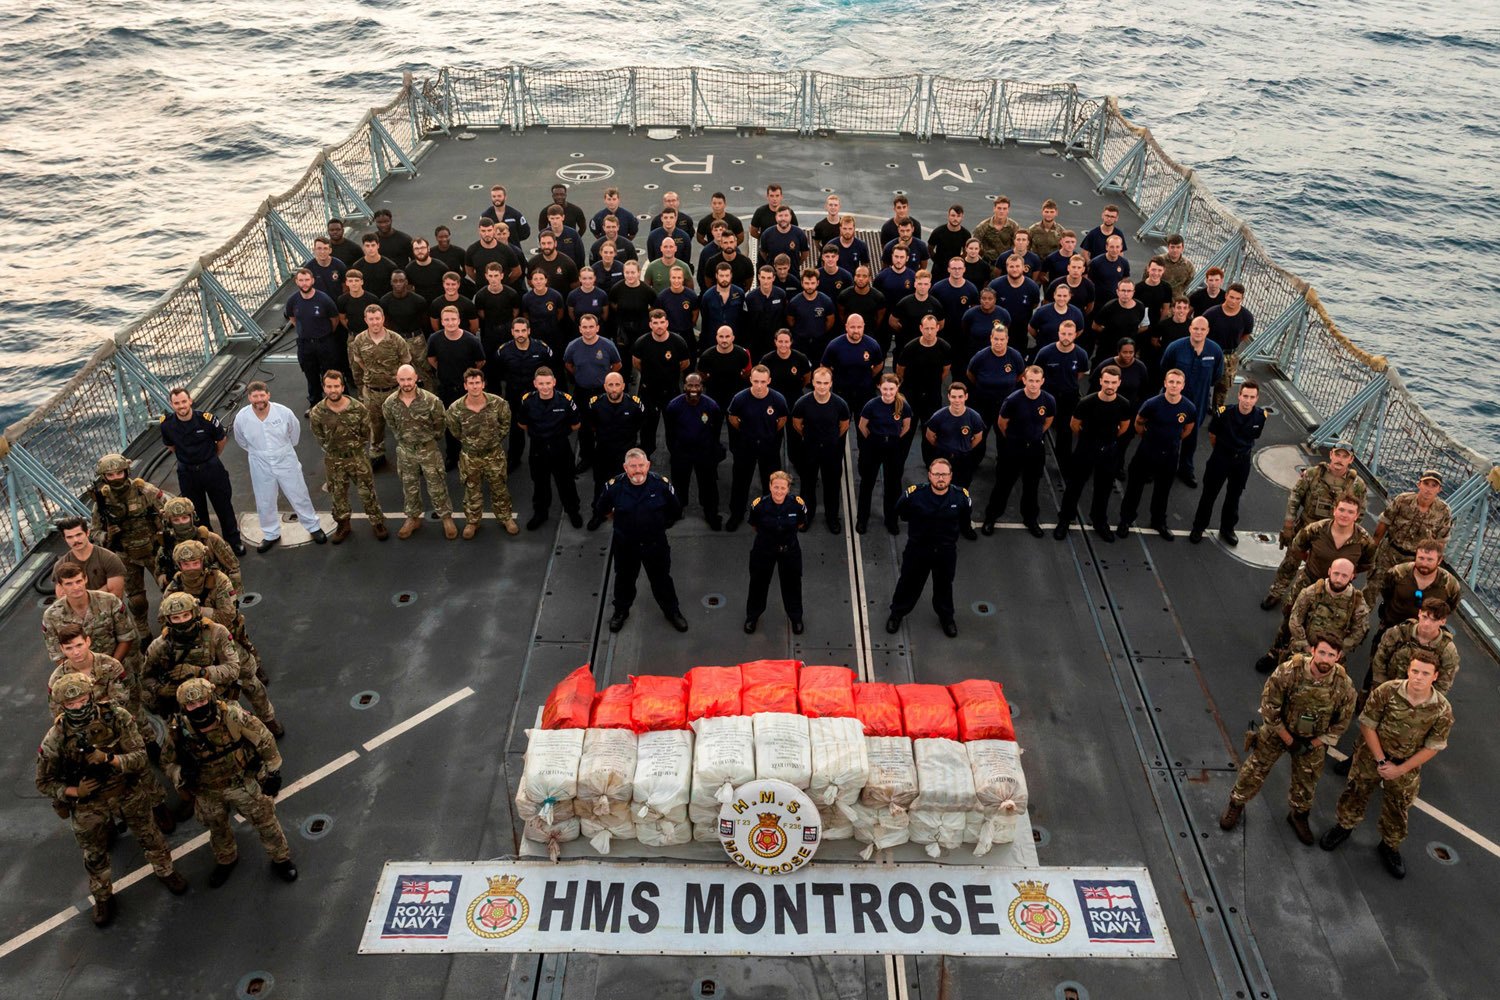 Team Montrose with the £15 million drugs haul.